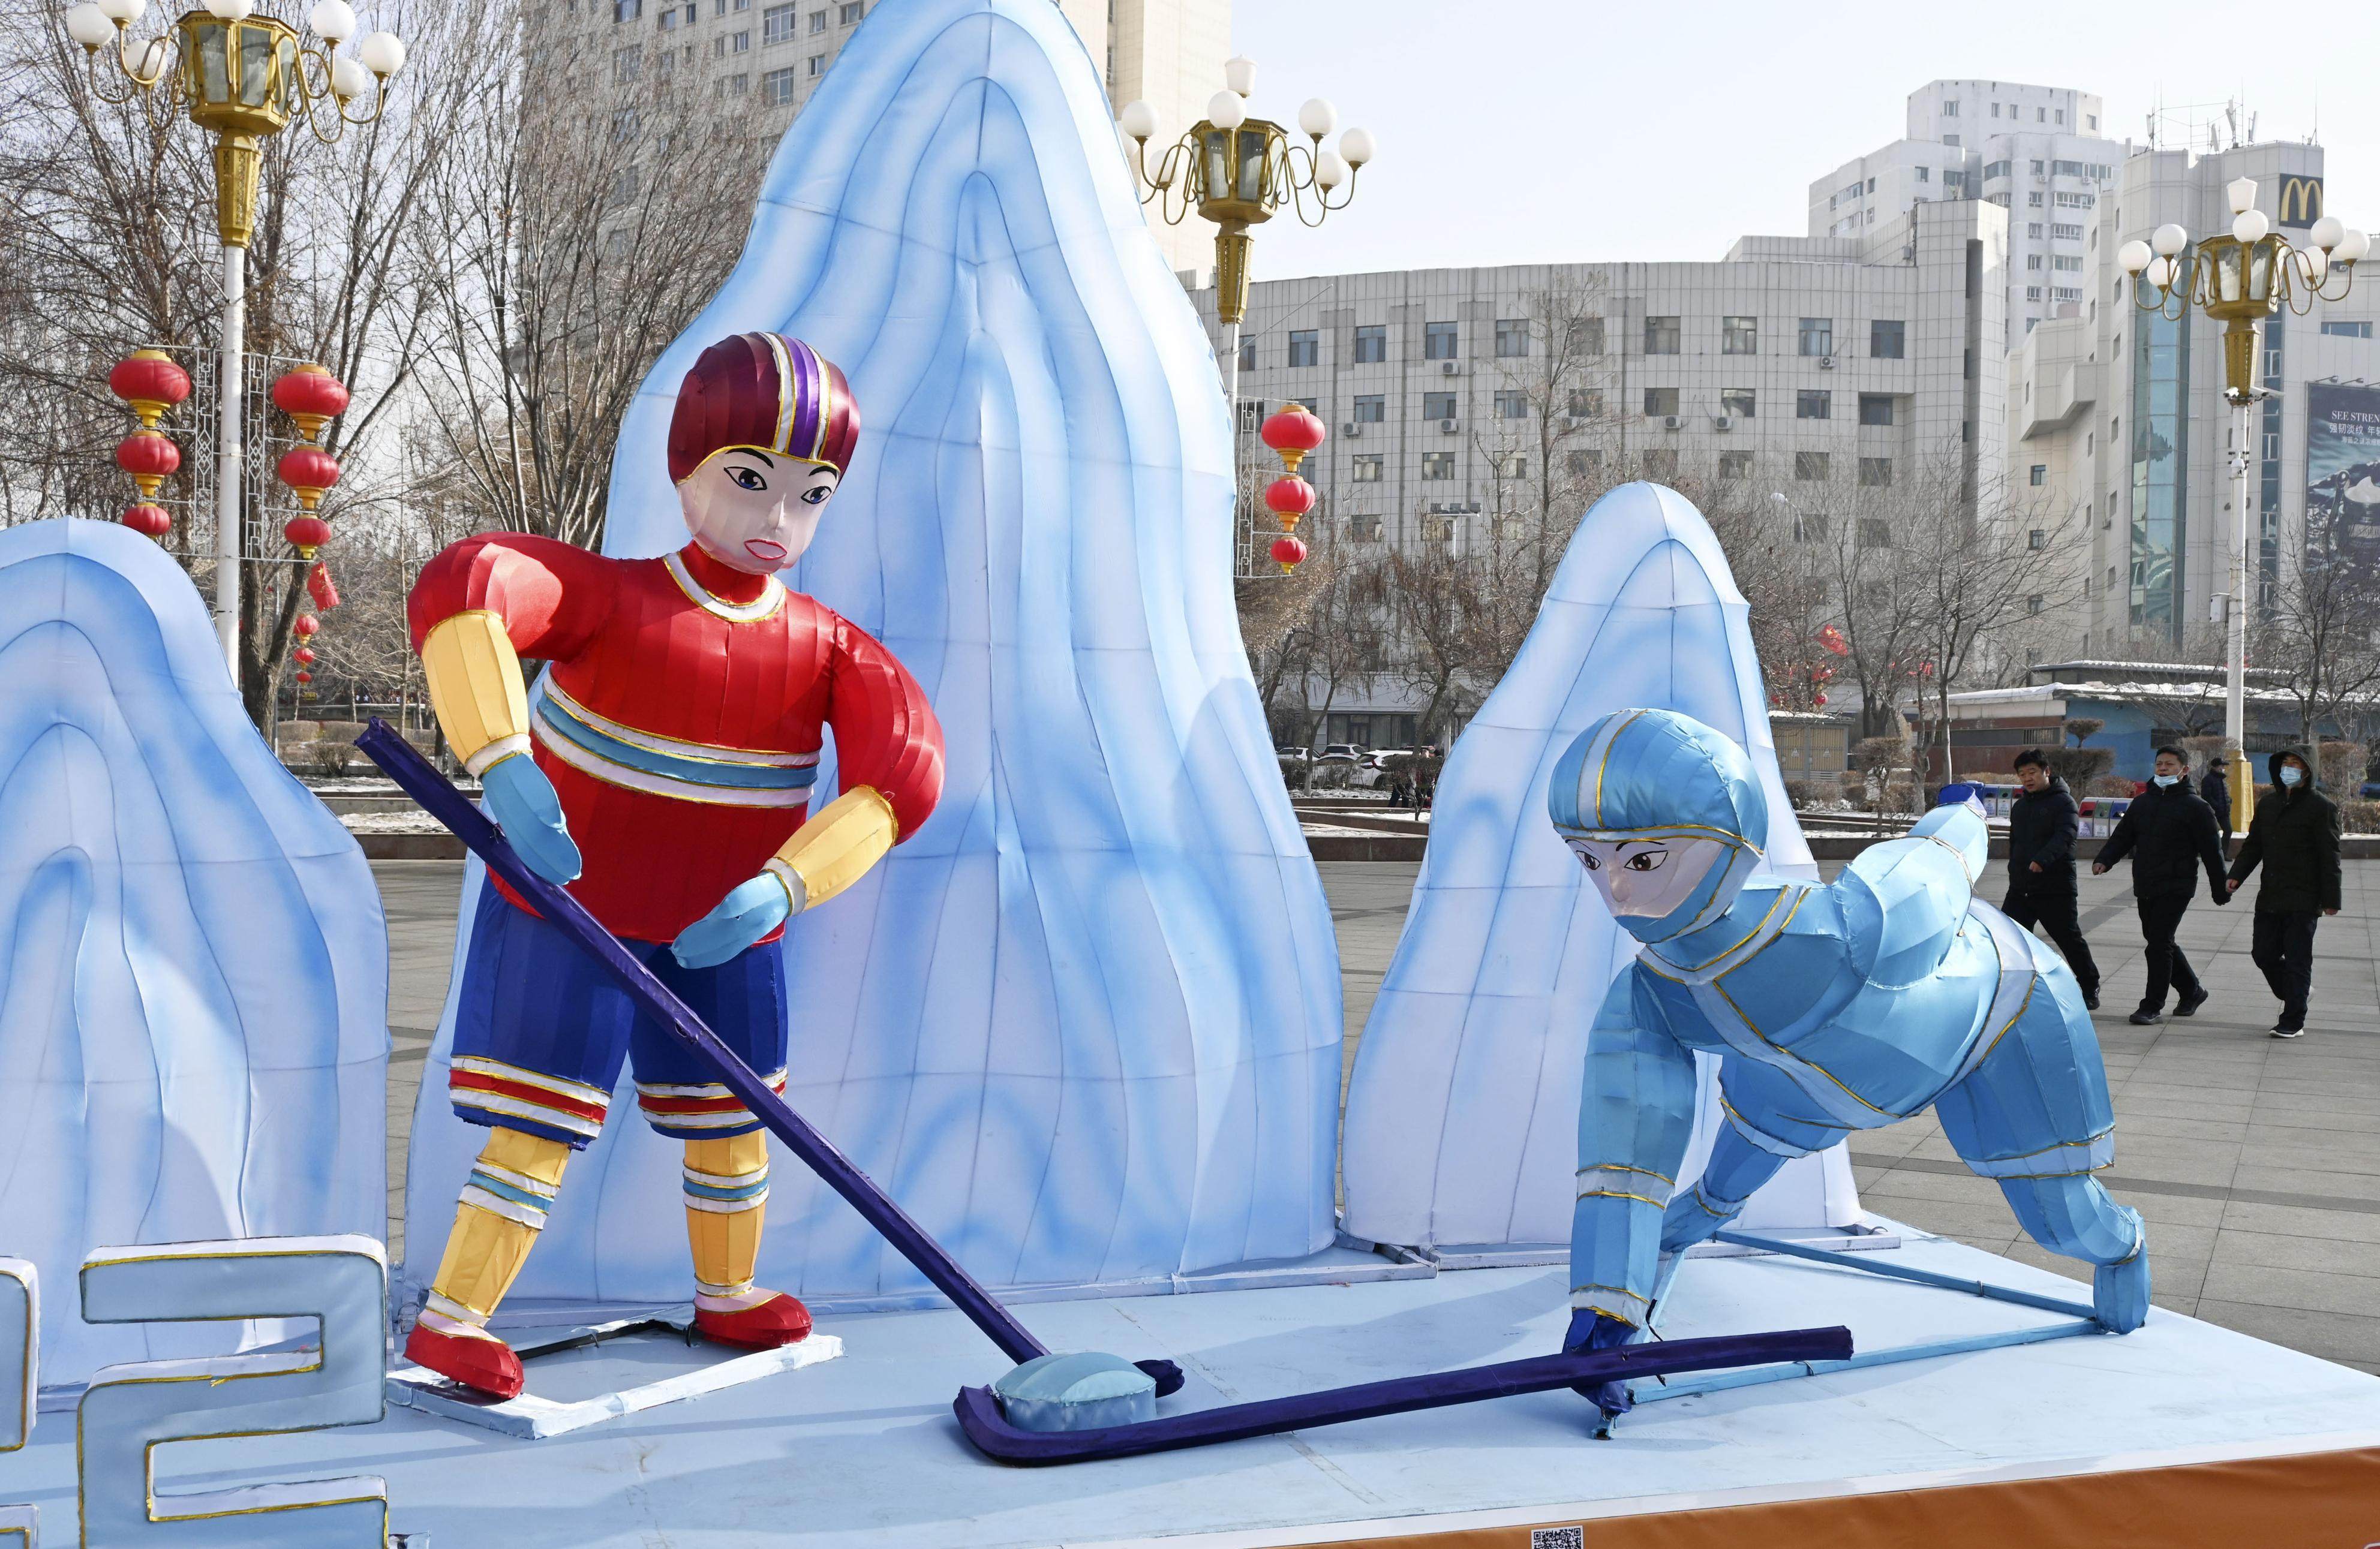 An installation to promote the Beijing Winter Olympics at a square in Urumqi, the capital of China’s Xinjiang Uygur Autonomous Region. Photo: Kyodo